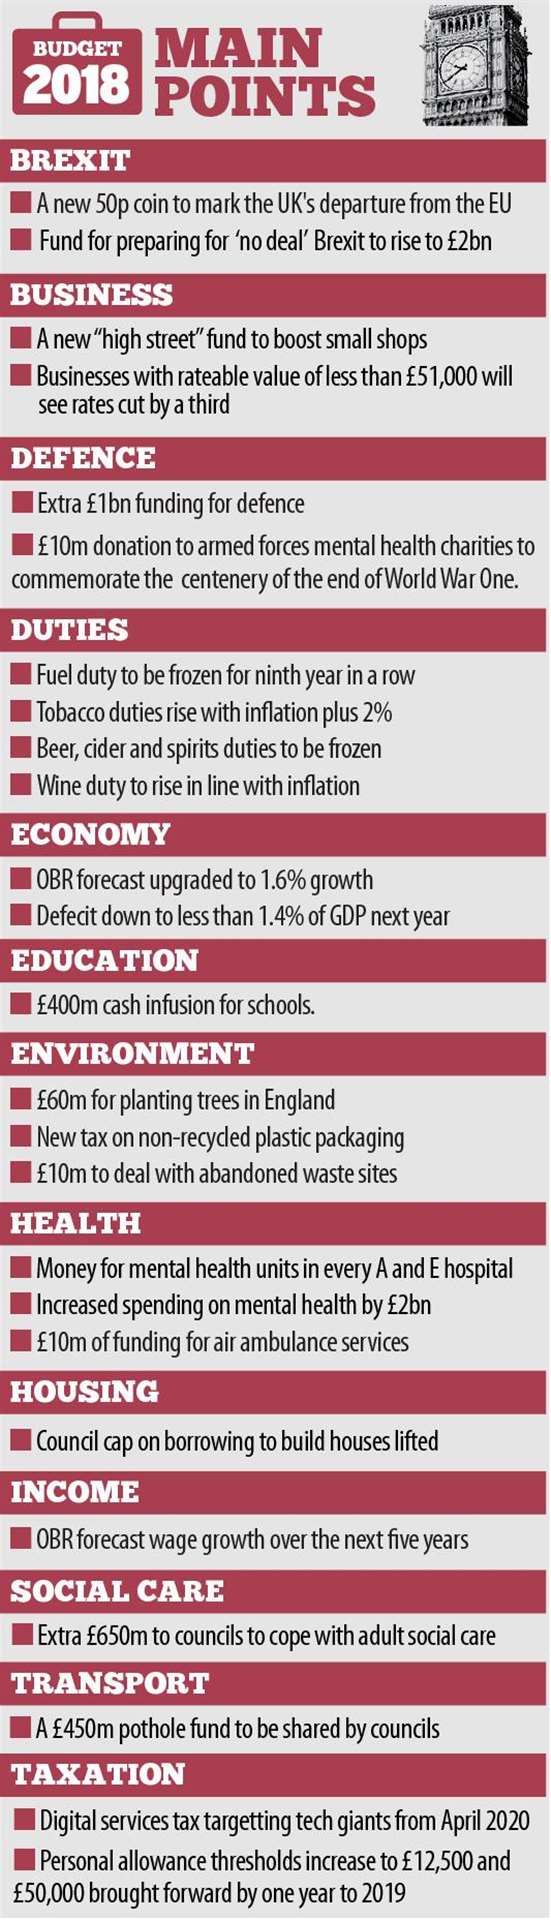 The Autumn Budget at a glance